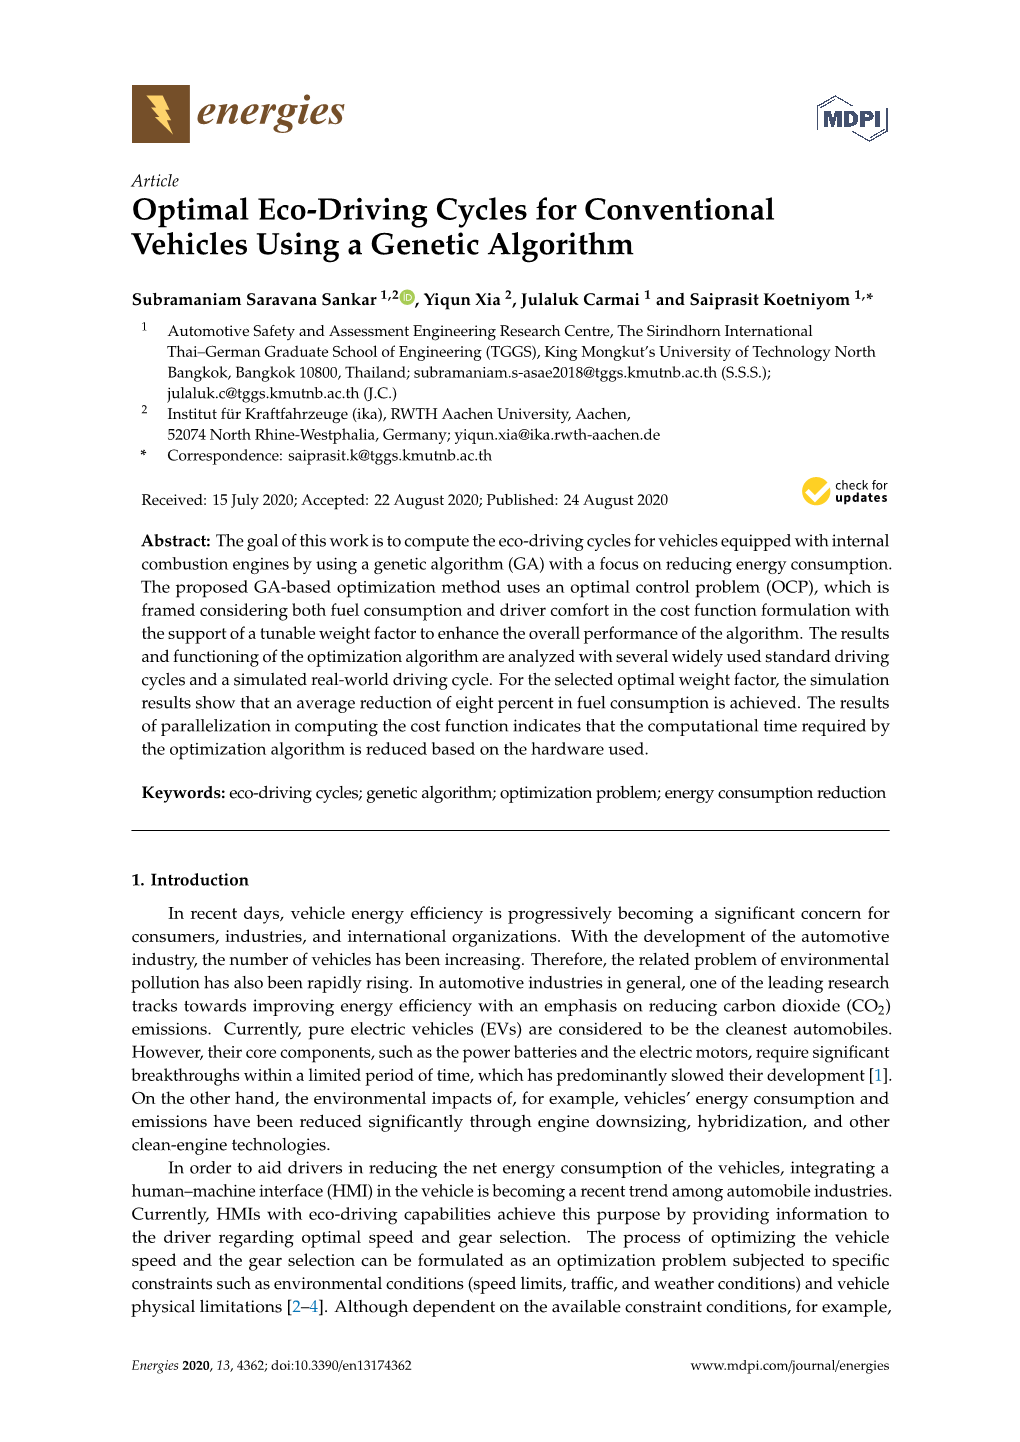 Optimal Eco-Driving Cycles for Conventional Vehicles Using a Genetic Algorithm